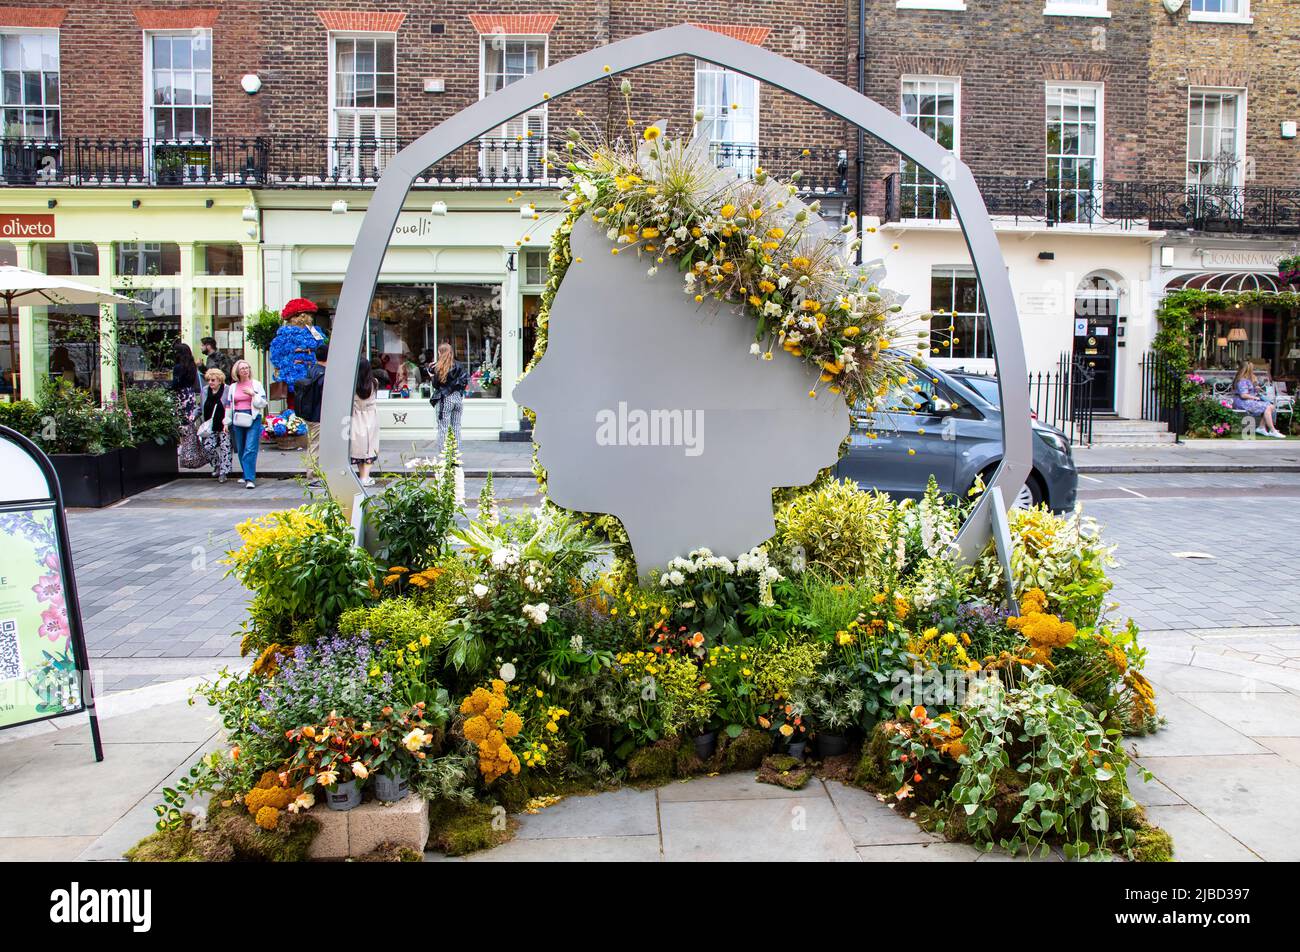 London, May 26, 2022: Steets of Chelsea get decoated with floral displays for annual Chelsea in Bloom competition Stock Photo